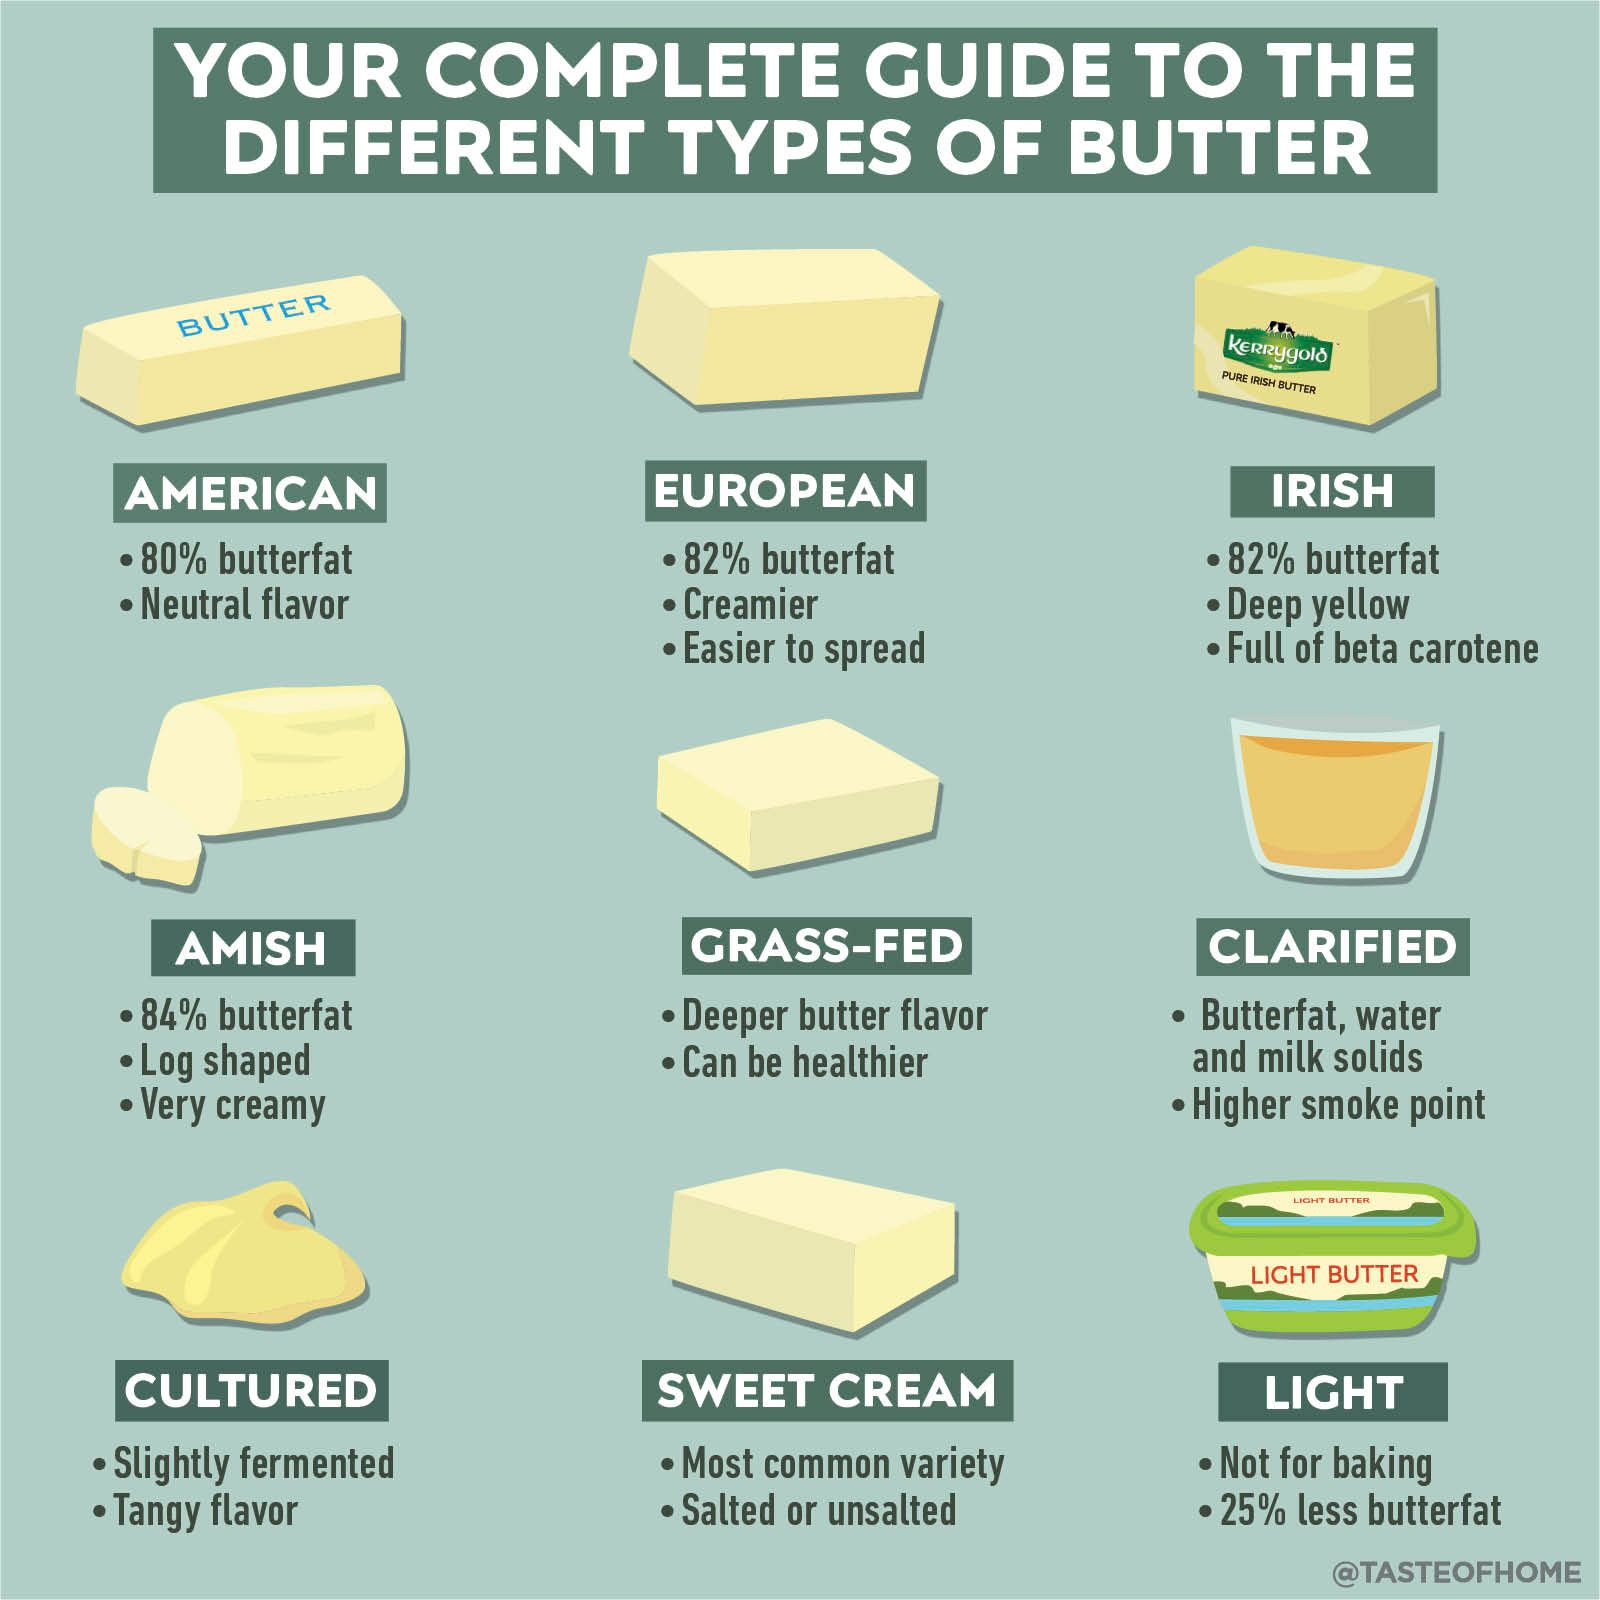 https://www.tasteofhome.com/wp-content/uploads/2019/02/Your-Complete-Guide-to-the-Different-Types-of-Butter1200X1200.jpg?fit=680%2C680